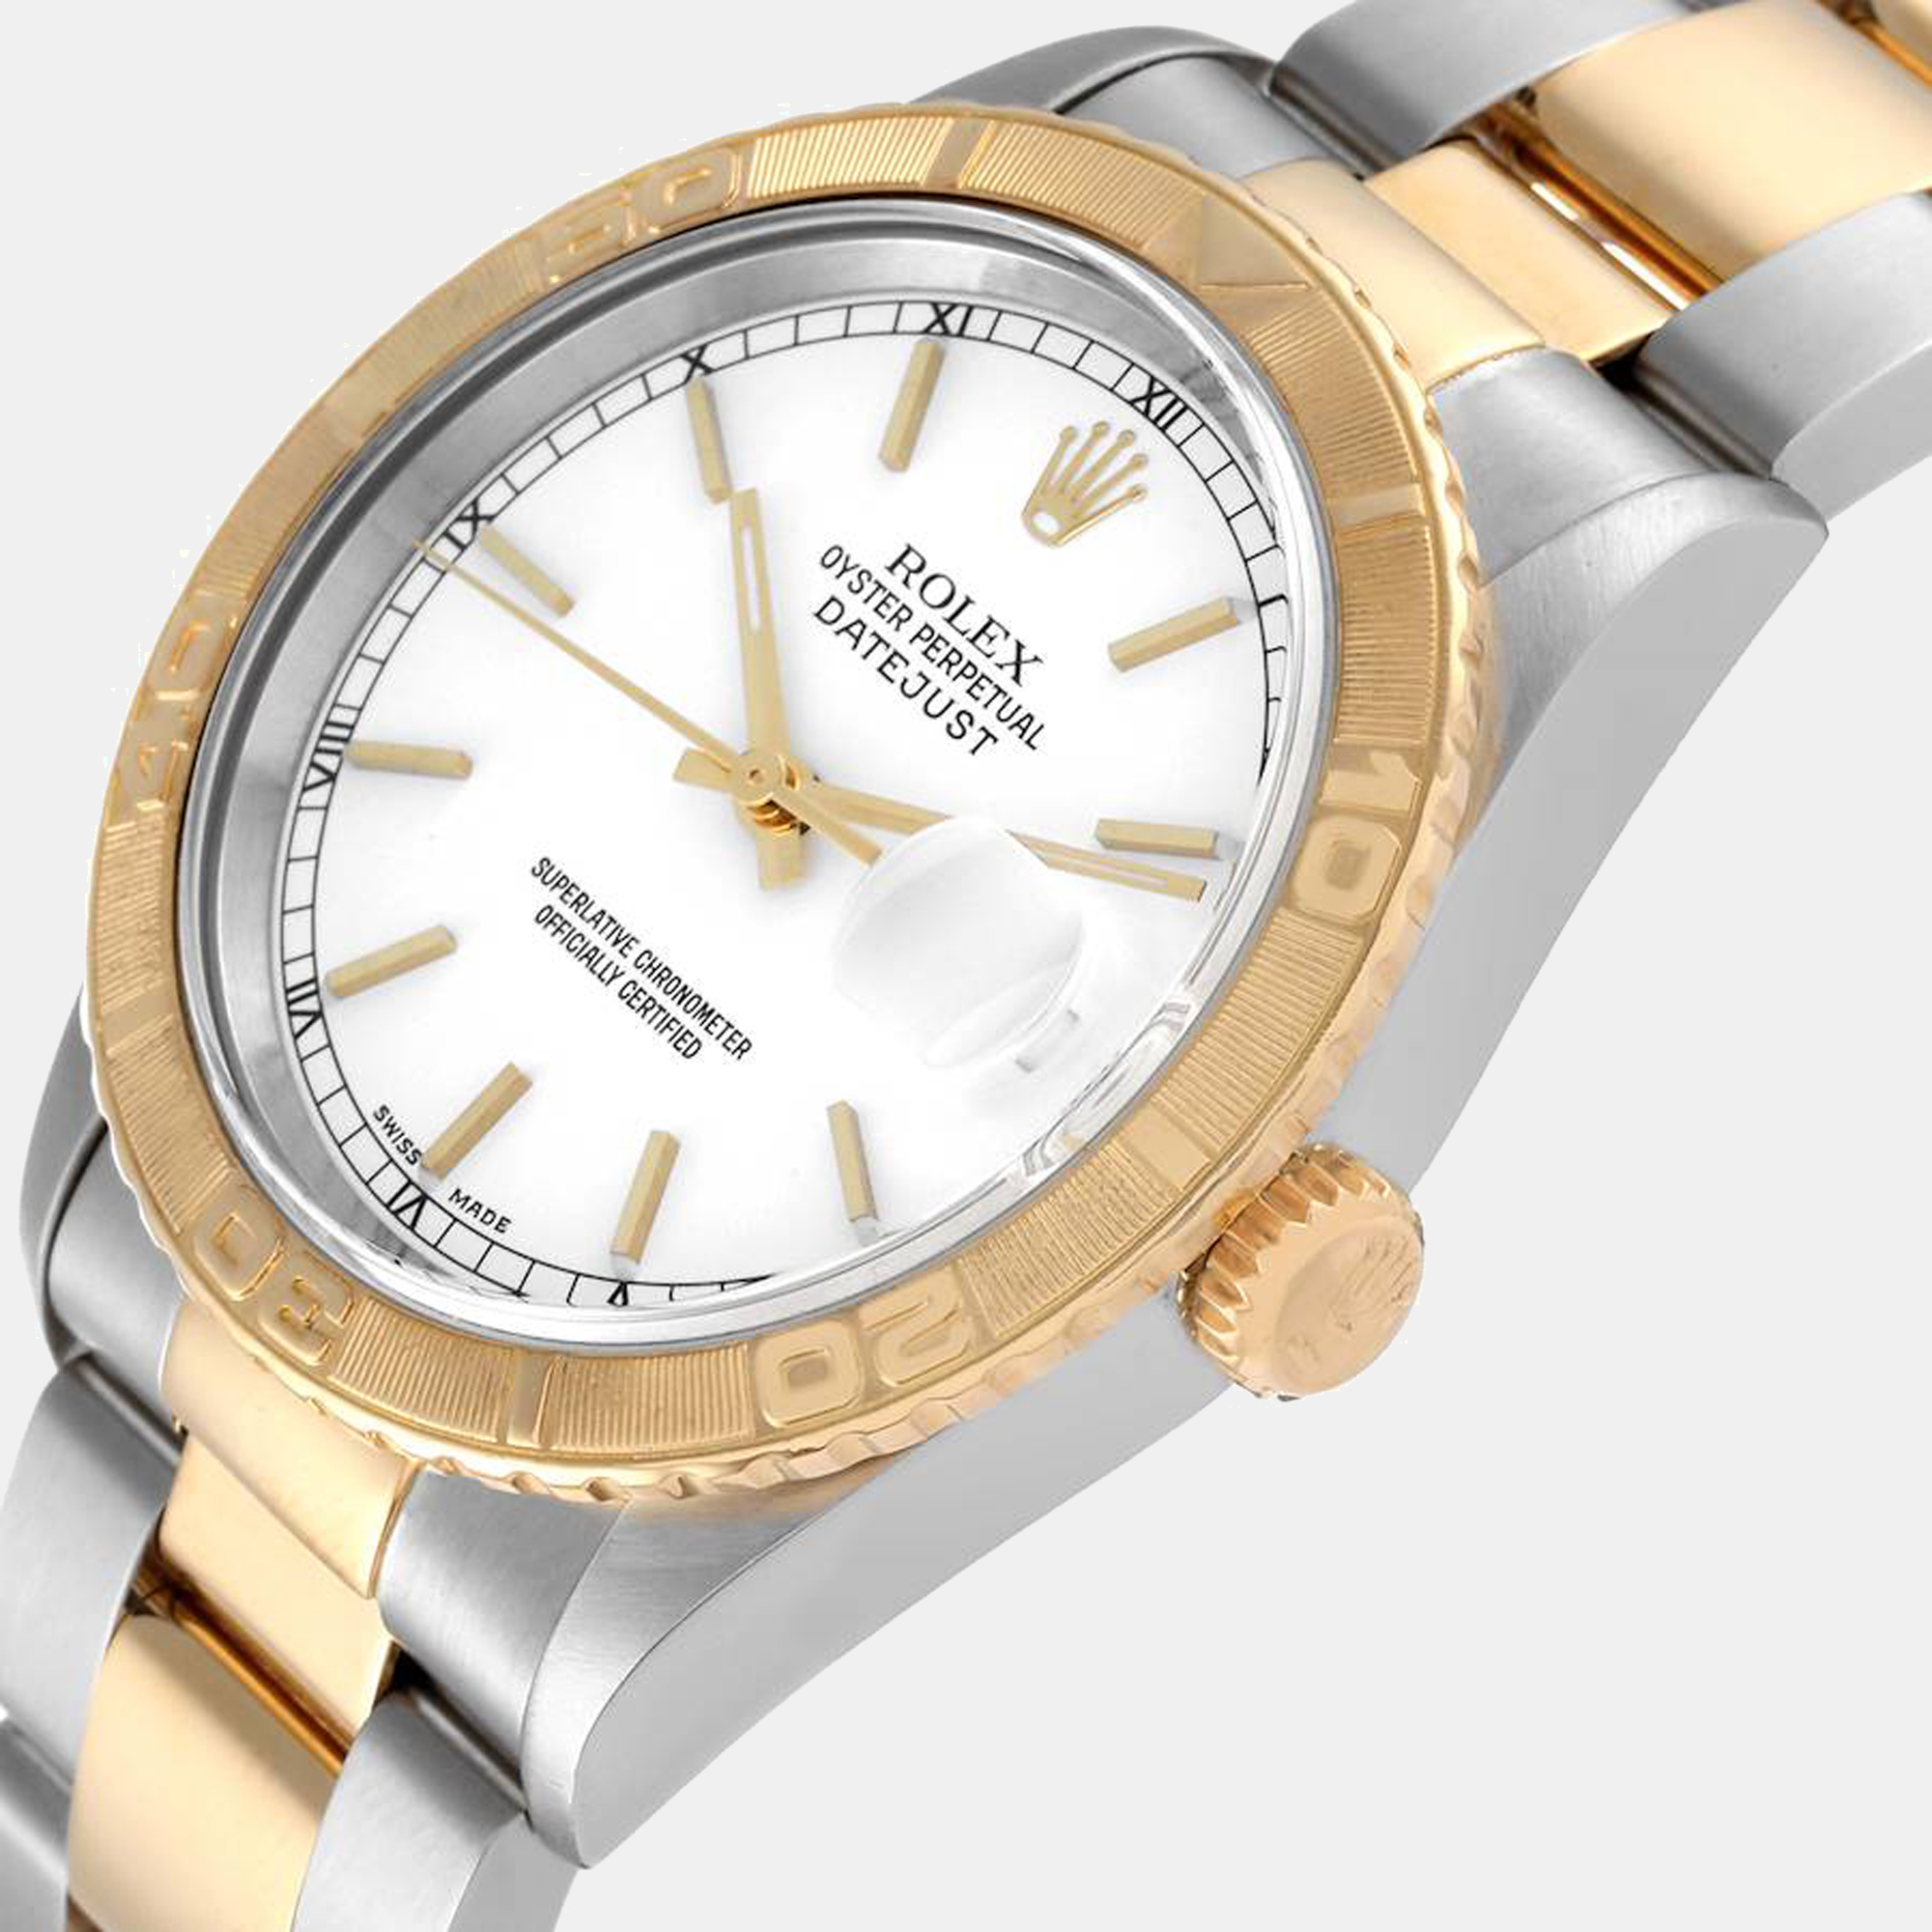 

Rolex White 18K Yellow Gold And Stainless Steel Datejust Turnograph 16263 Men's Wristwatch 36 mm